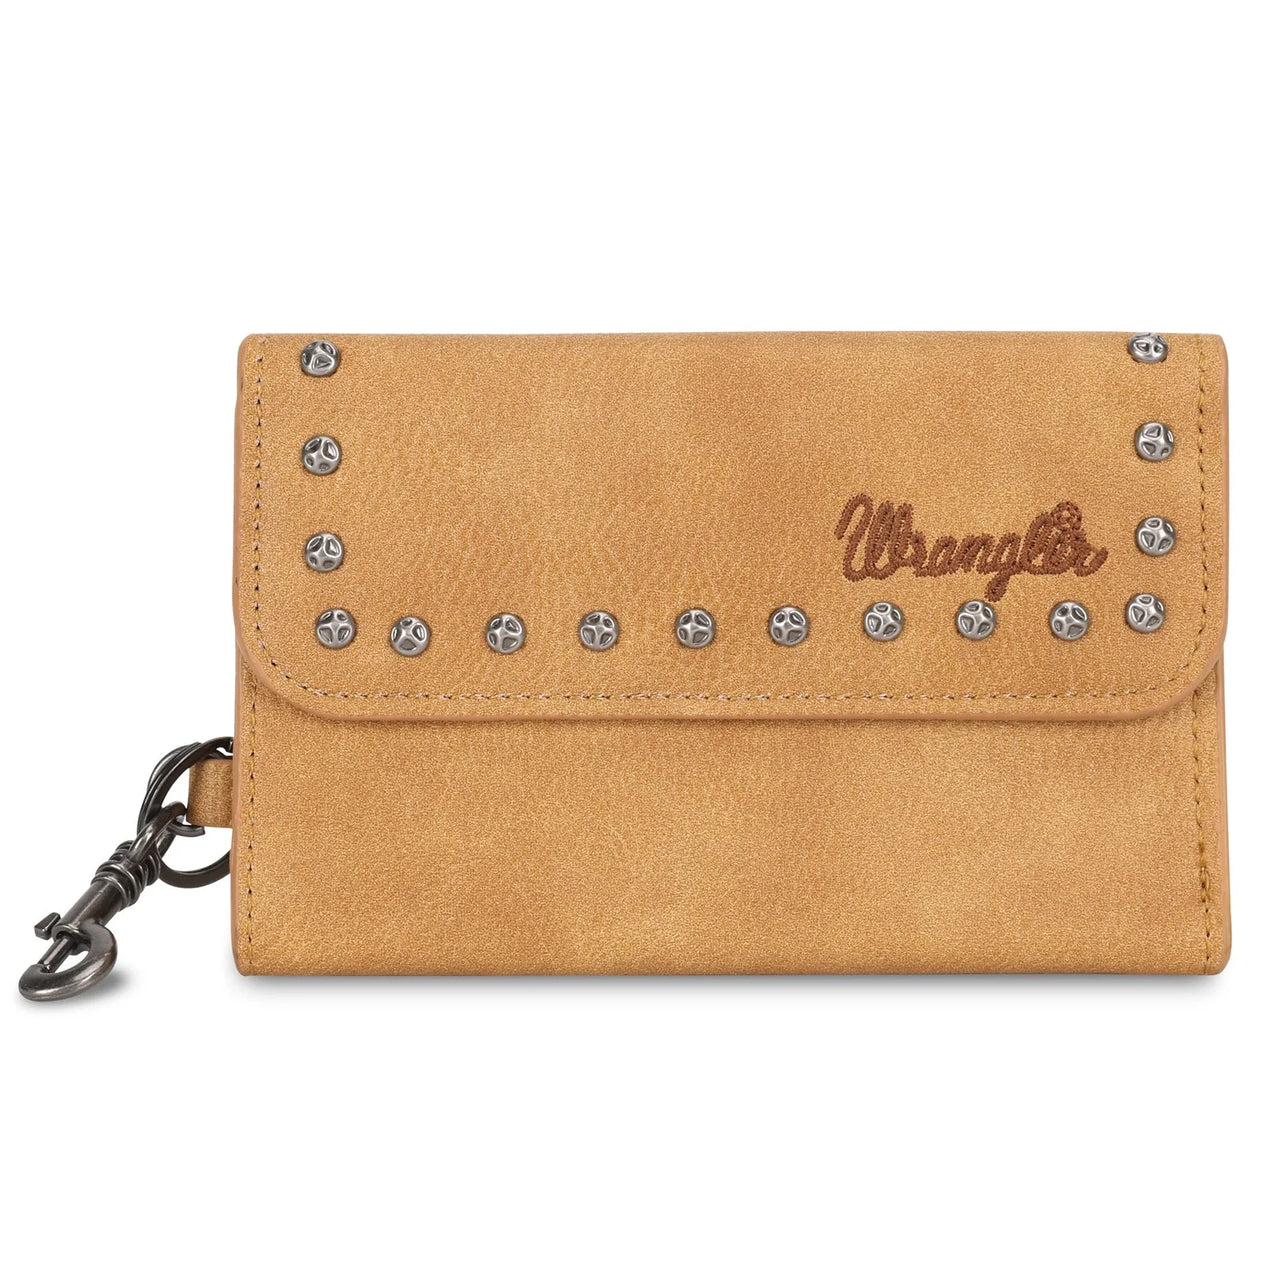 Wrangler Women's Studded Accents Tri-Fold Keychain Wallet - Light Brown